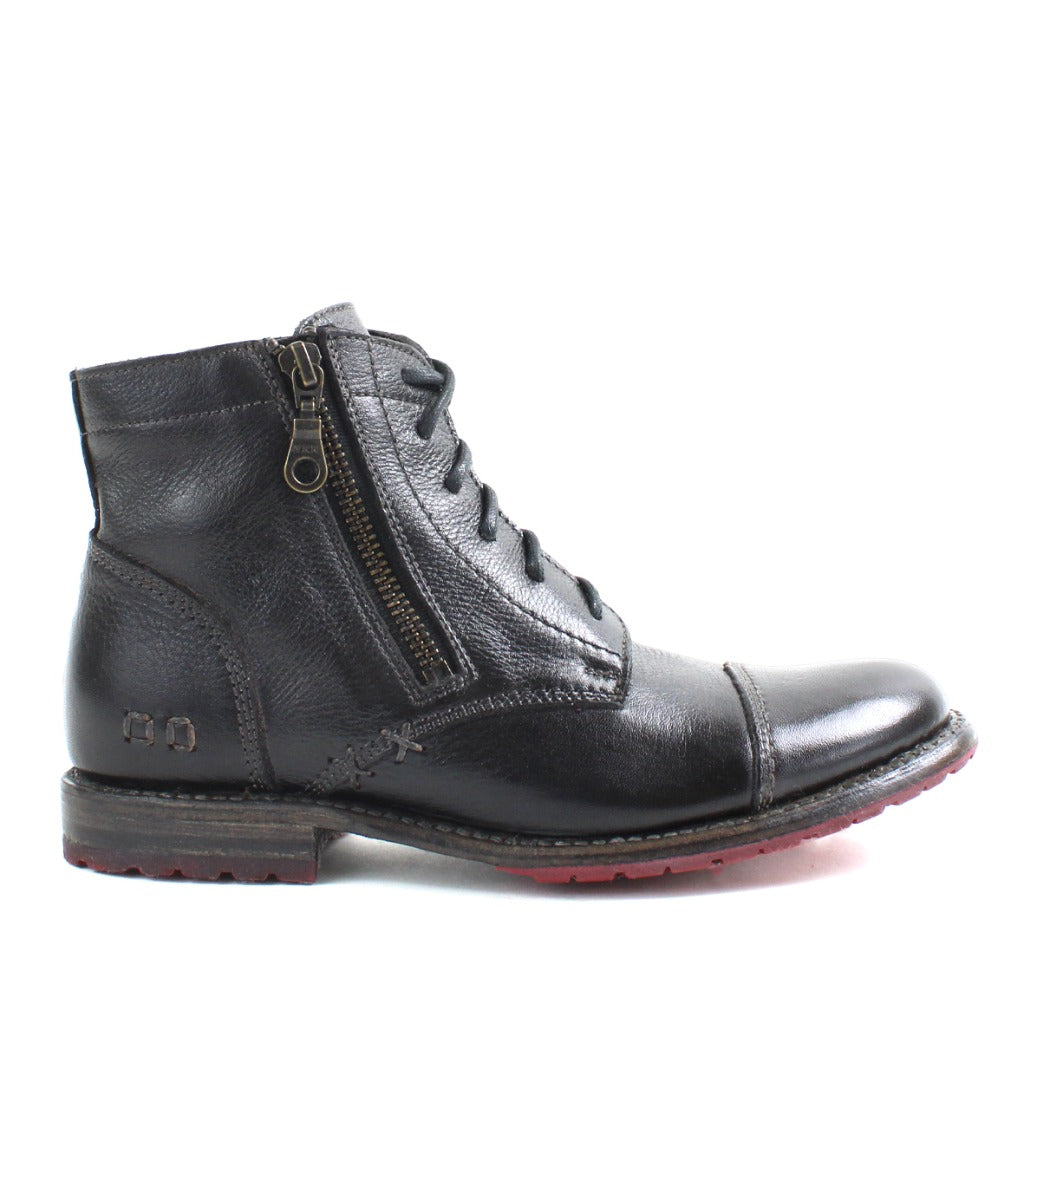 A women's Bonnie II by Bed Stu black leather boot with a zipper on the side.